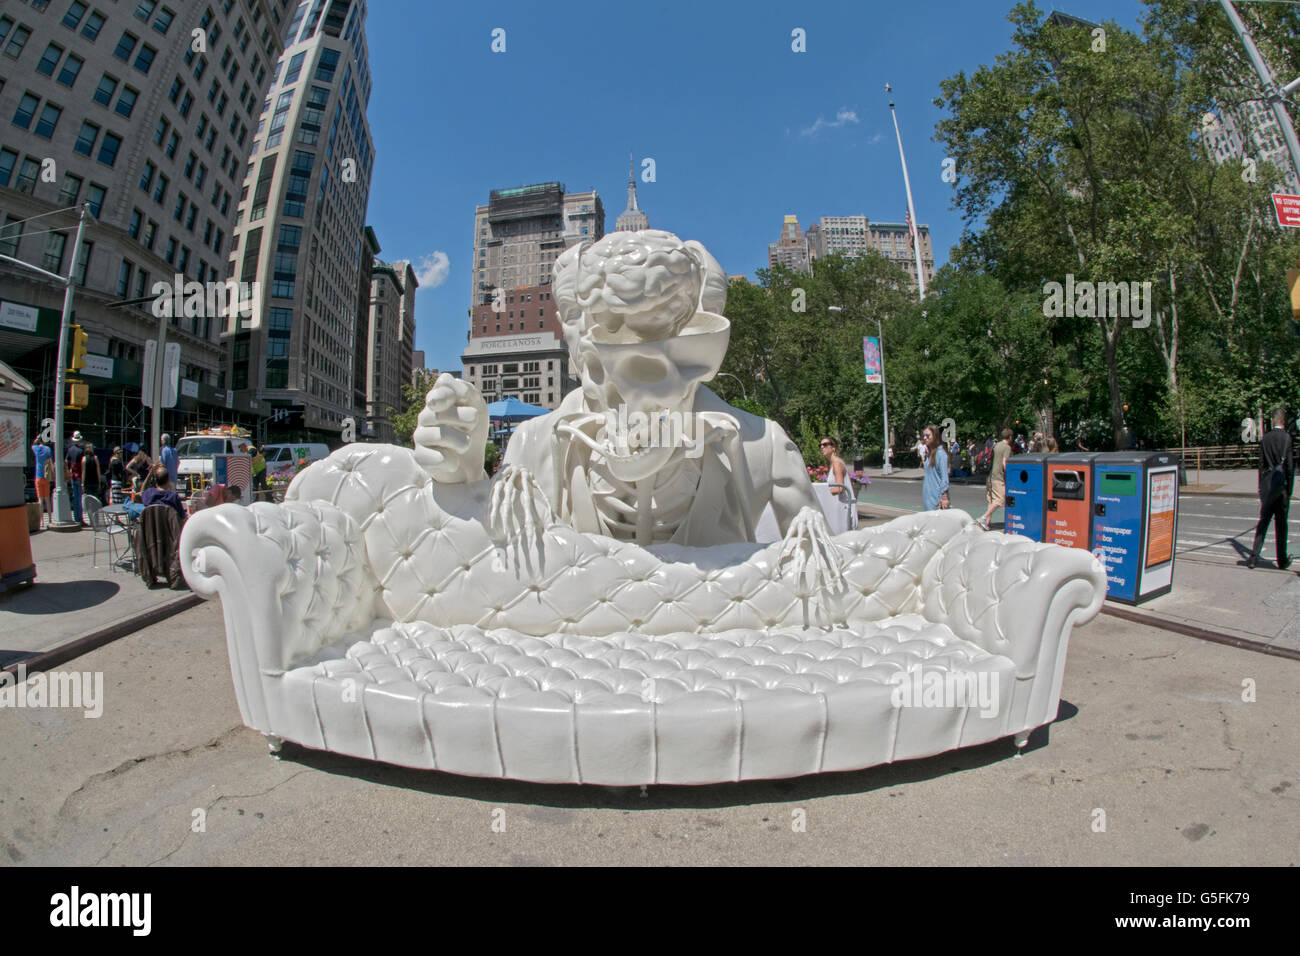 Fisheye view 10 foot statue of Sigmund Freud being dissected on display on 23rd Street in Manhattan in the Flatiron district Stock Photo